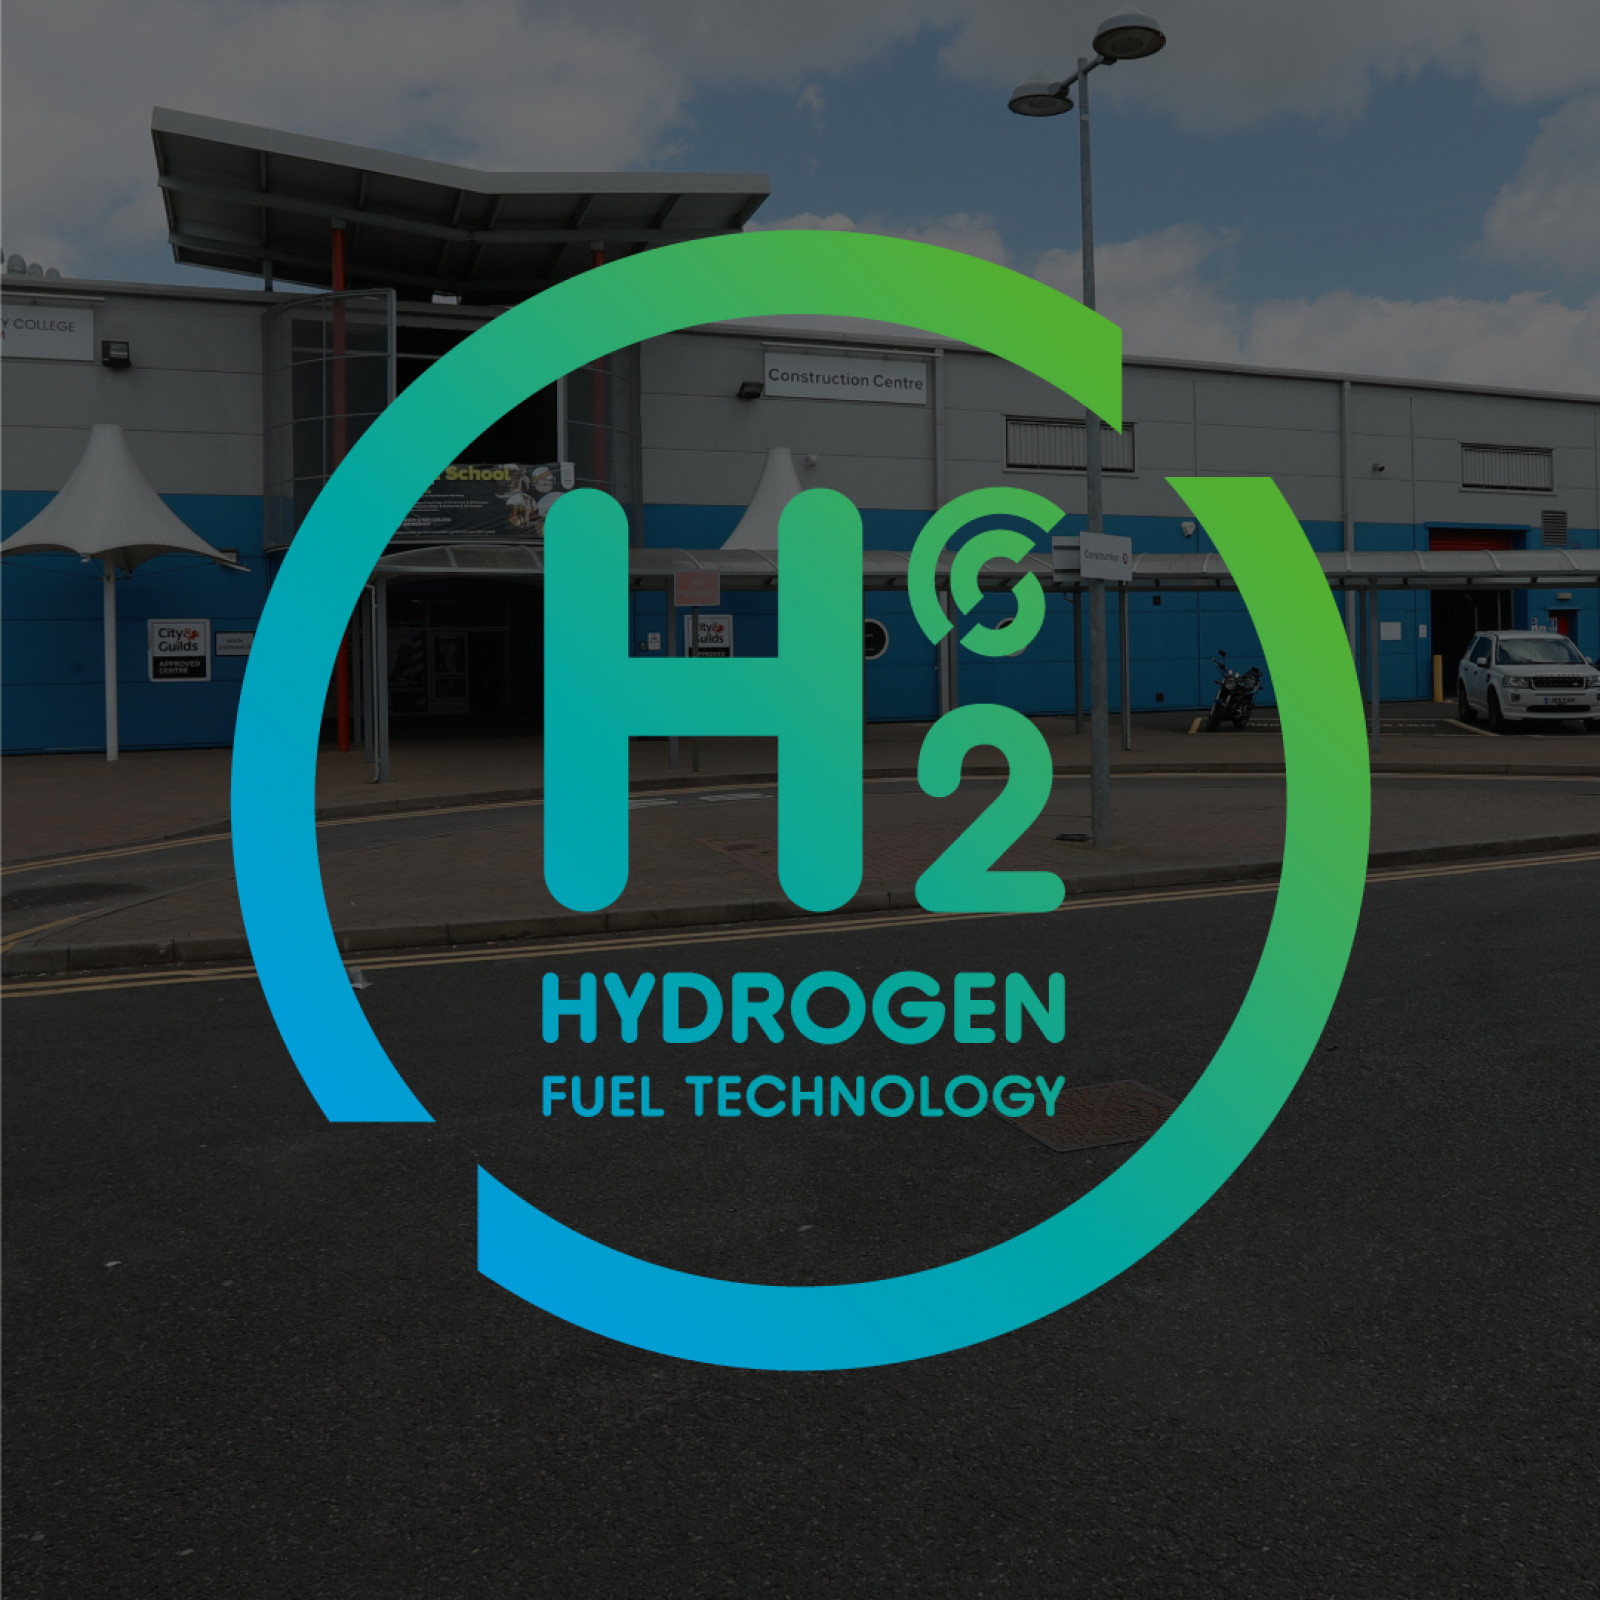 South & City College Birmingham to invest in hydrogen fuel technology